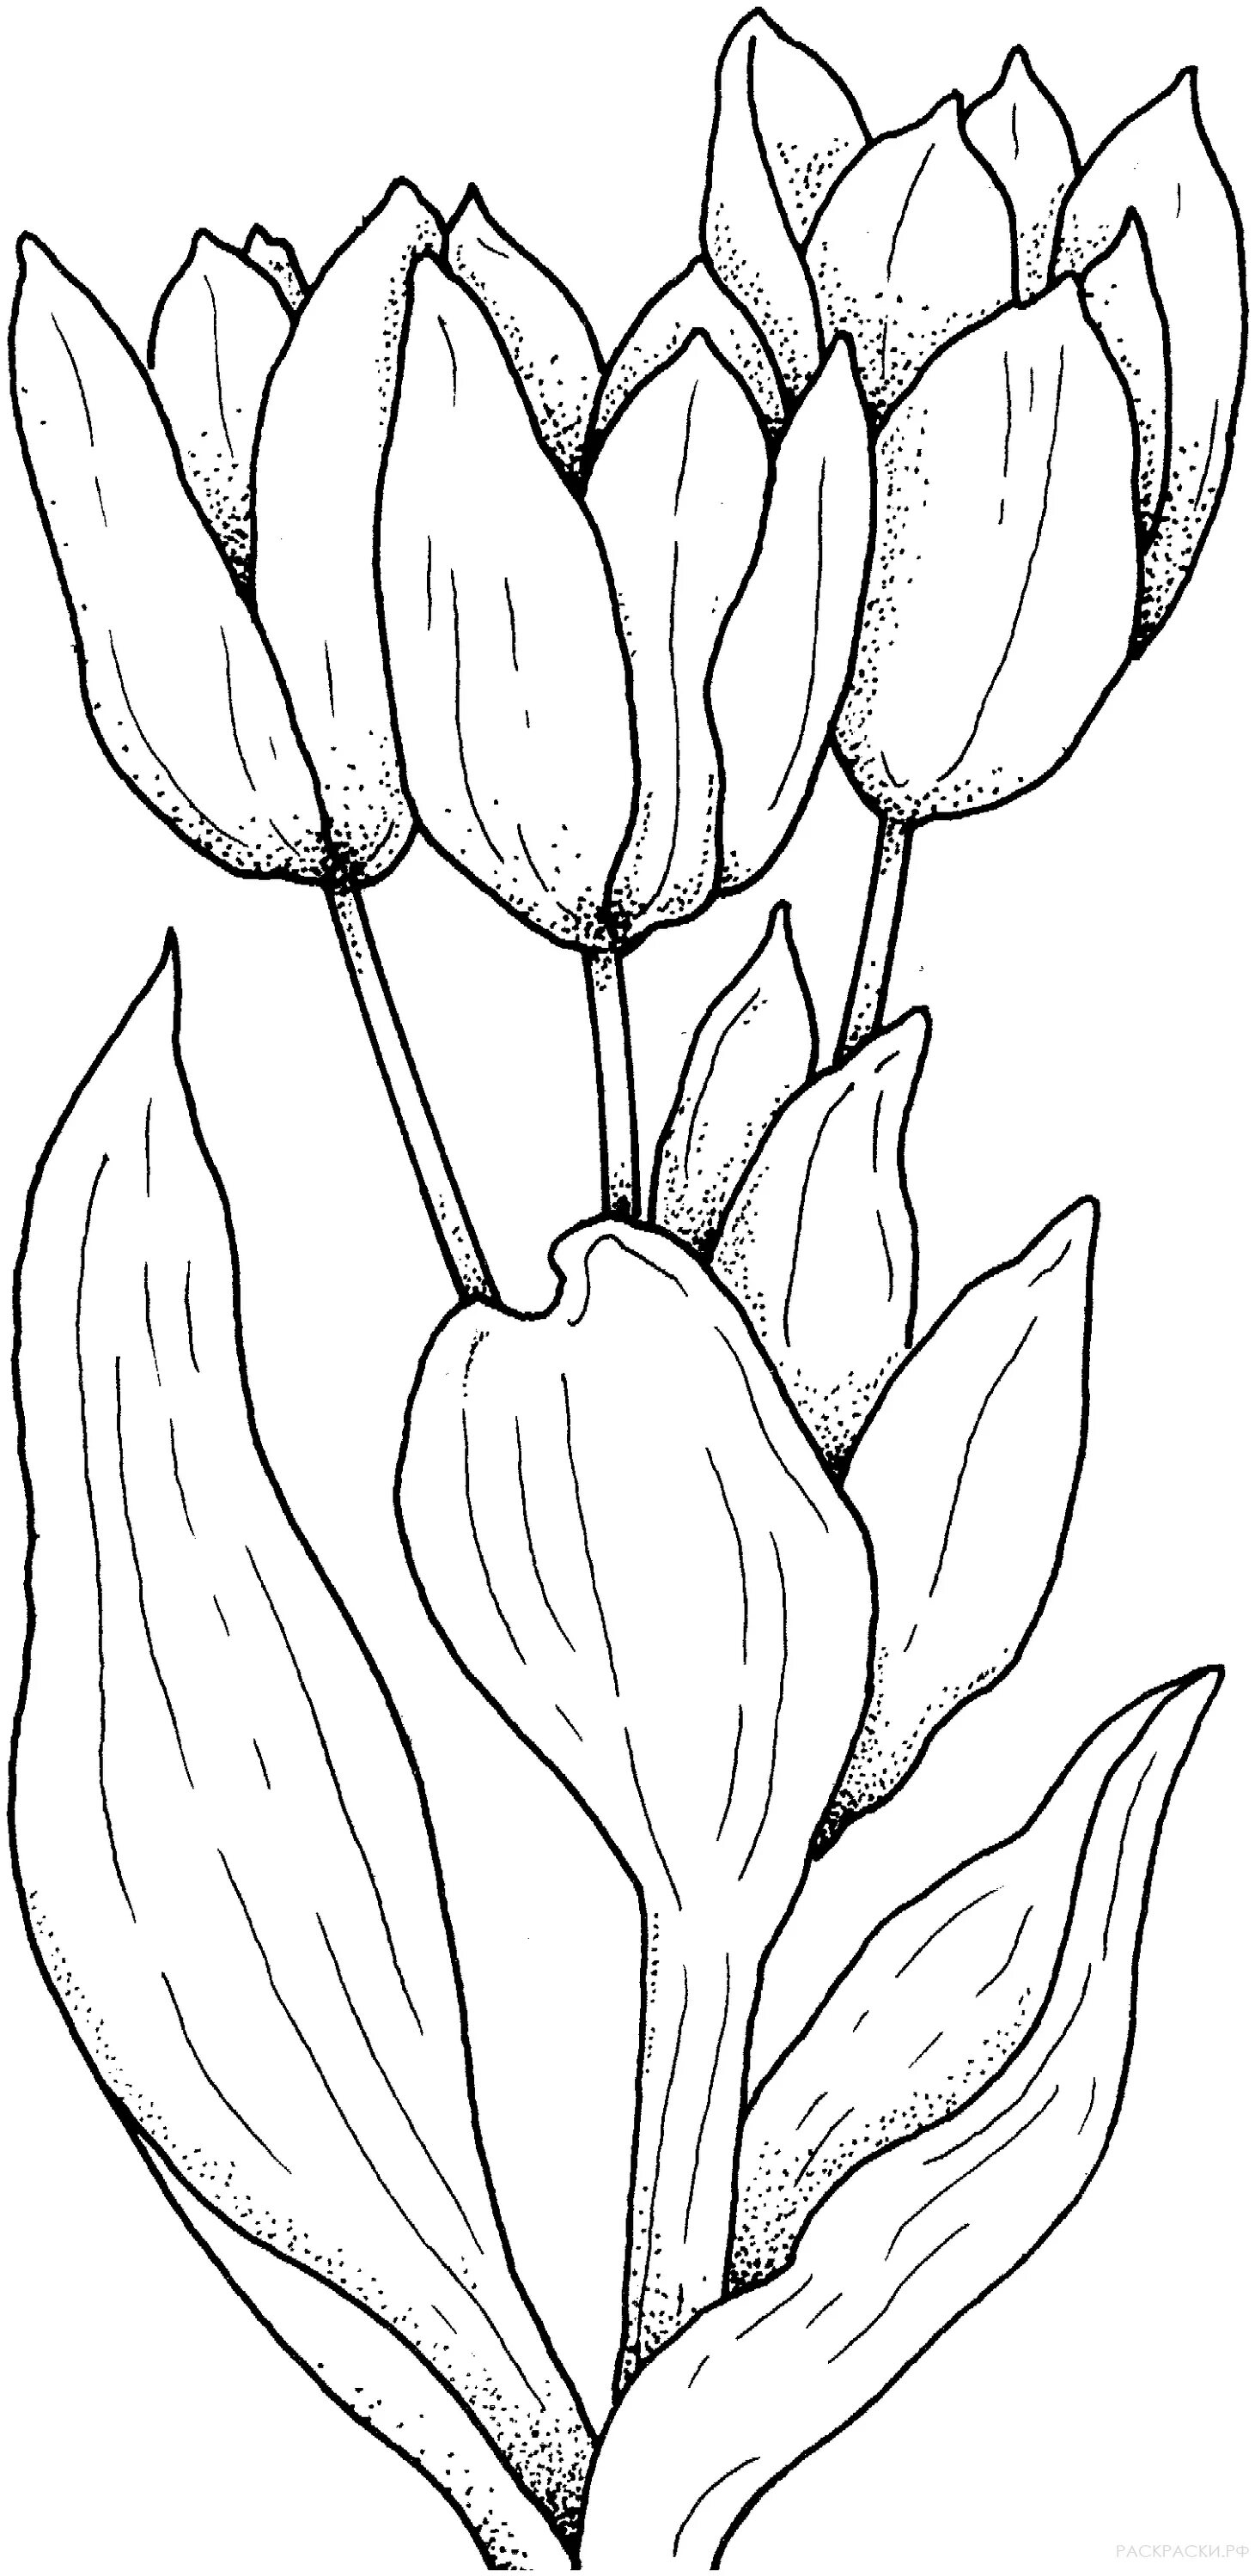 Superb tulip coloring page